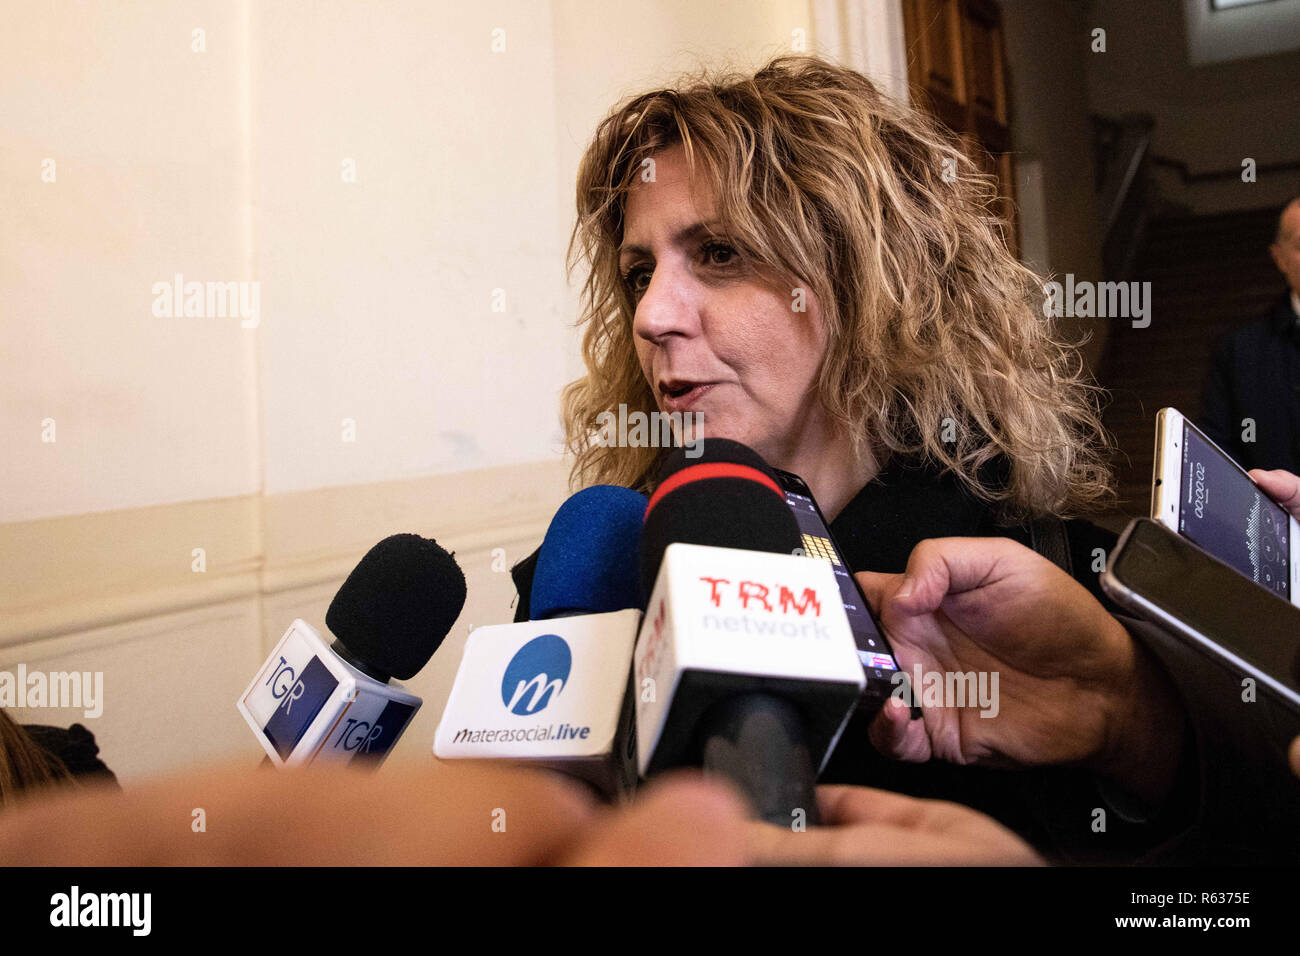 Matera, Italy. 3rd Dec, 2018. The Minister of the South Barbara lezzi seen speaking at a press conference after the coordination meeting with the Municipality of Matera, the Matera Foundation 2019, FAL, Anas, Invitalia to check the time schedule of the infrastructural works planned for Matera 2019. Credit: Cosimo Martemucci/SOPA Images/ZUMA Wire/Alamy Live News Stock Photo